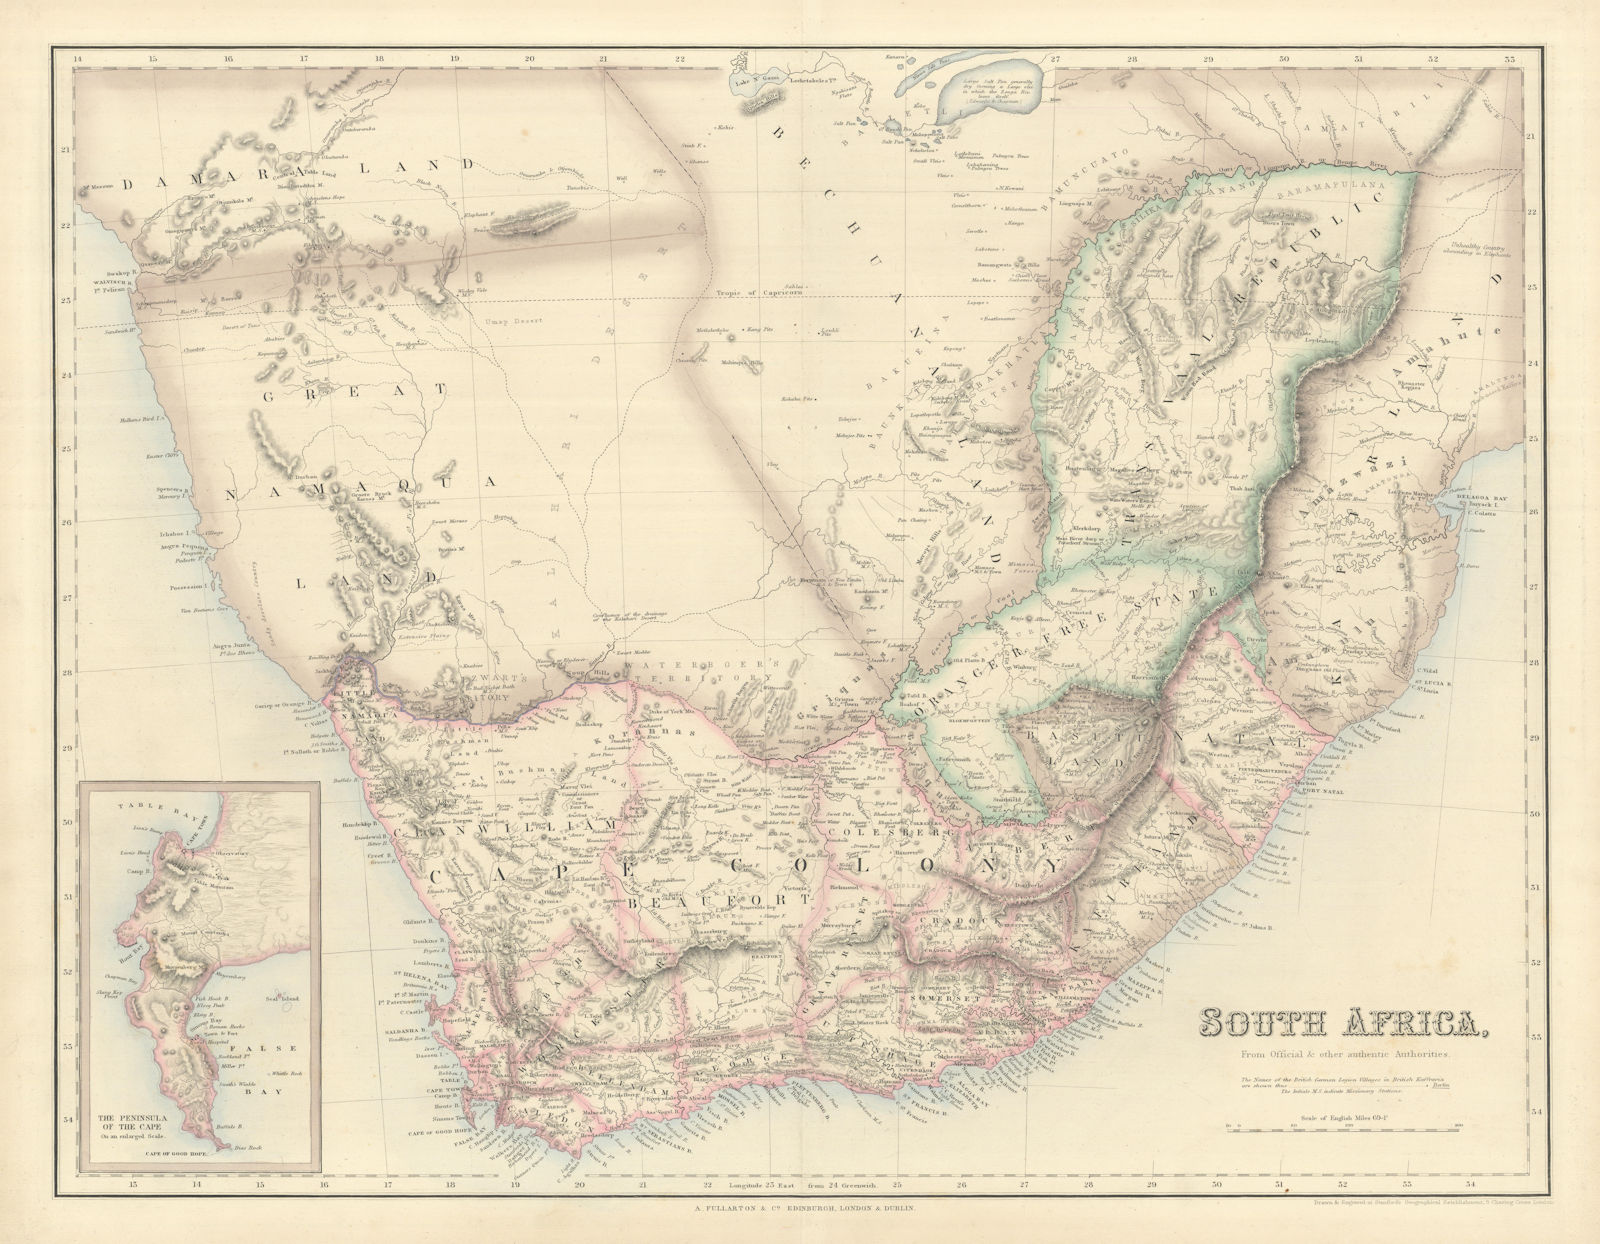 Southern Africa. Cape Town. Bechuanaland Gt Namaqua Land. SWANSTON 1860 map